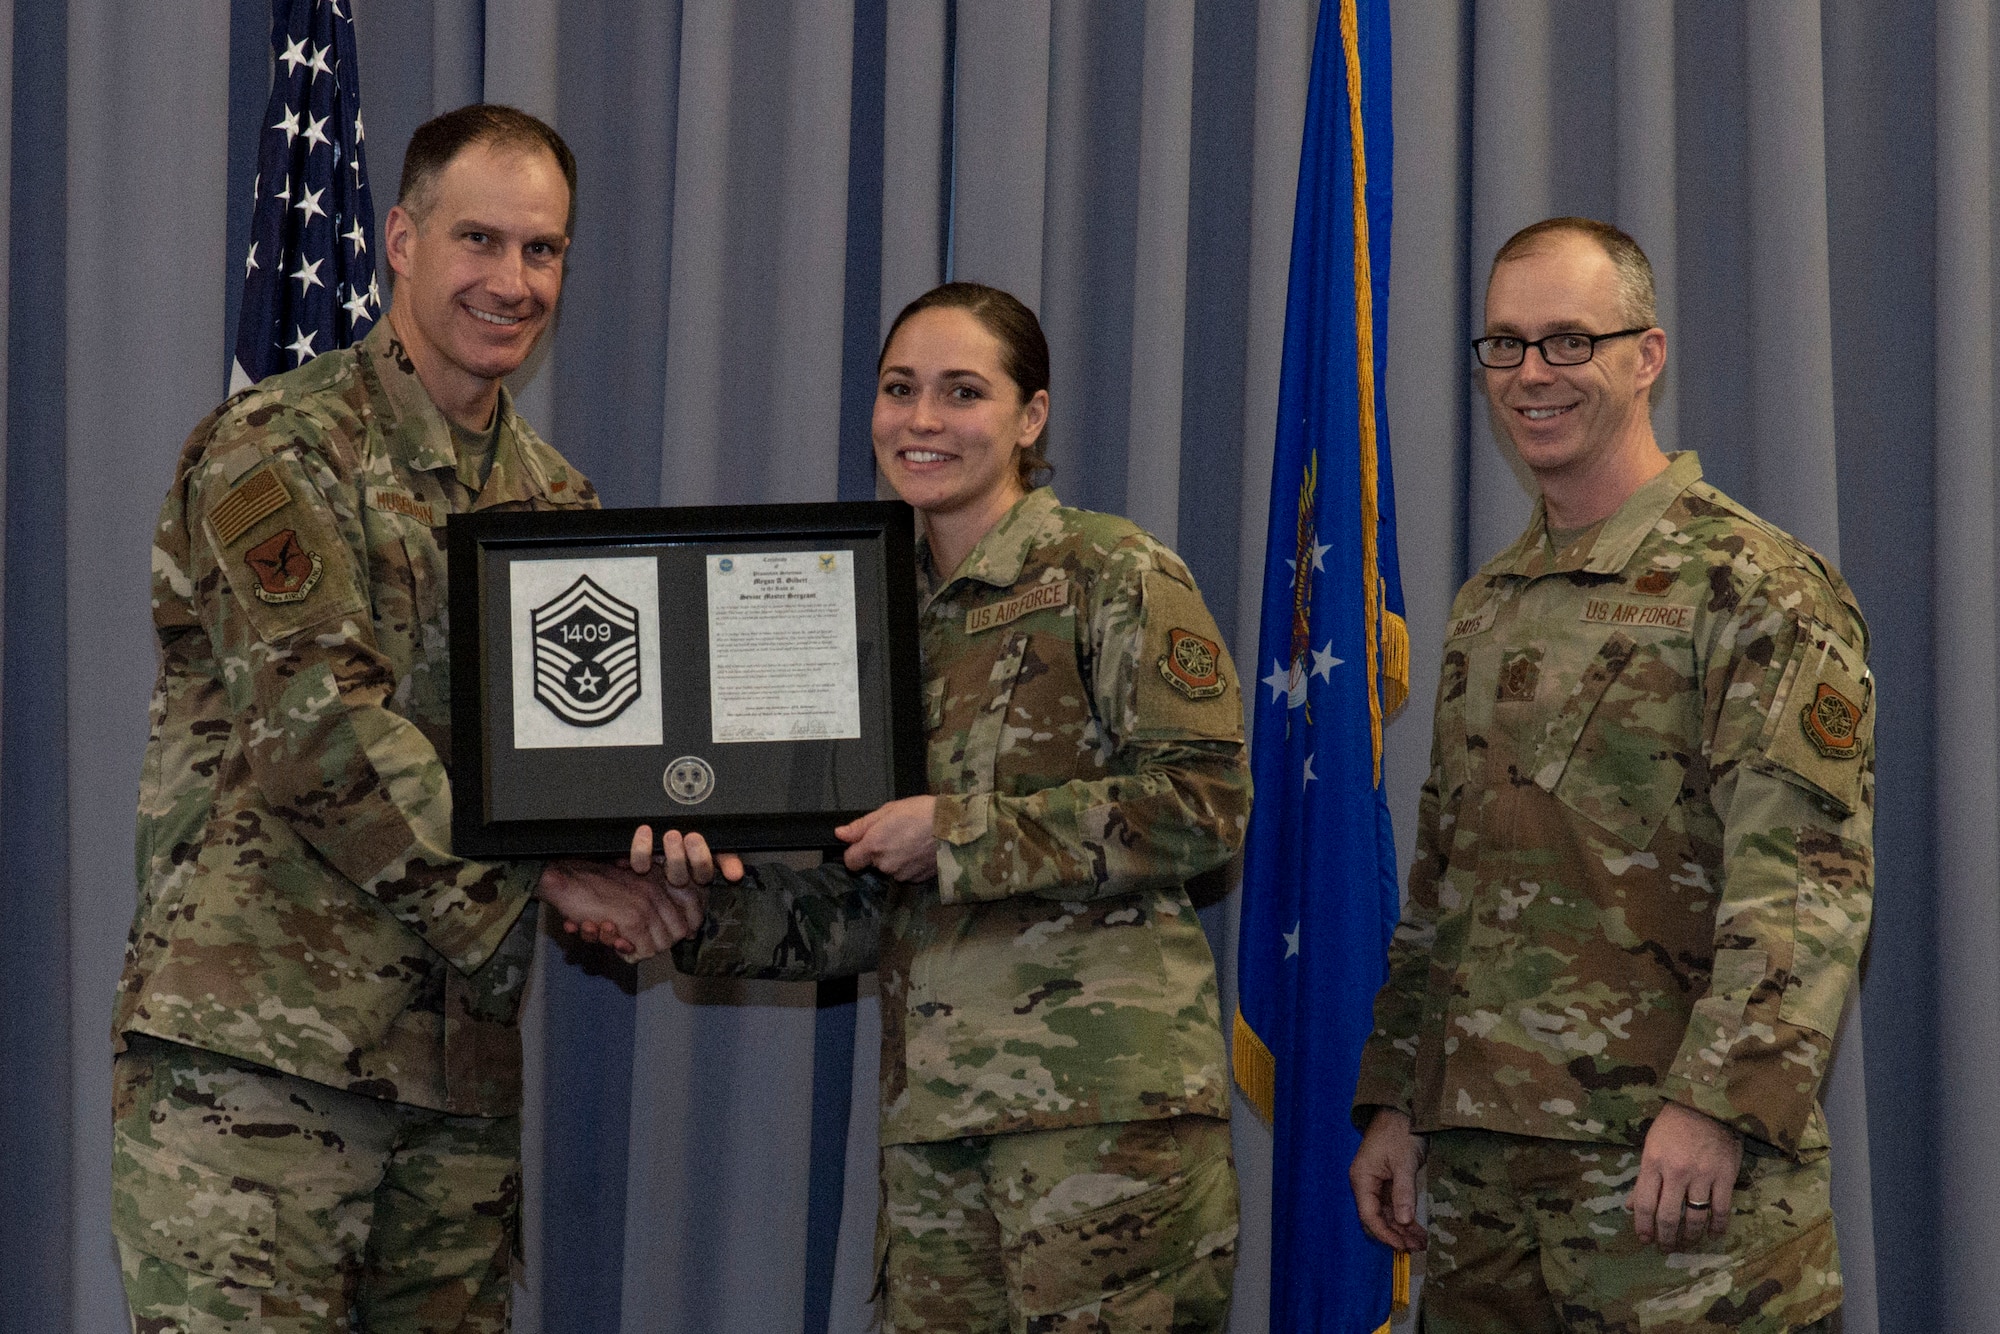 Master Sgt. Meagan Gilbert, center, 436th Maintenance Group maintenance training element chief, accepts her senior master sergeant promotion plaque from Col. Matt Husemann, left, 436th Airlift Wing commander, and Chief Master Sgt. Timothy Bayes, 436th AW command chief, during the senior master sergeant promotion release party at Dover Air Force Base, Delaware, March 18, 2022. Gilbert was one of seven master sergeants at Dover AFB selected for promotion to senior master sergeant in the 22E8 promotion cycle. (U.S. Air Force photo by Roland Balik)